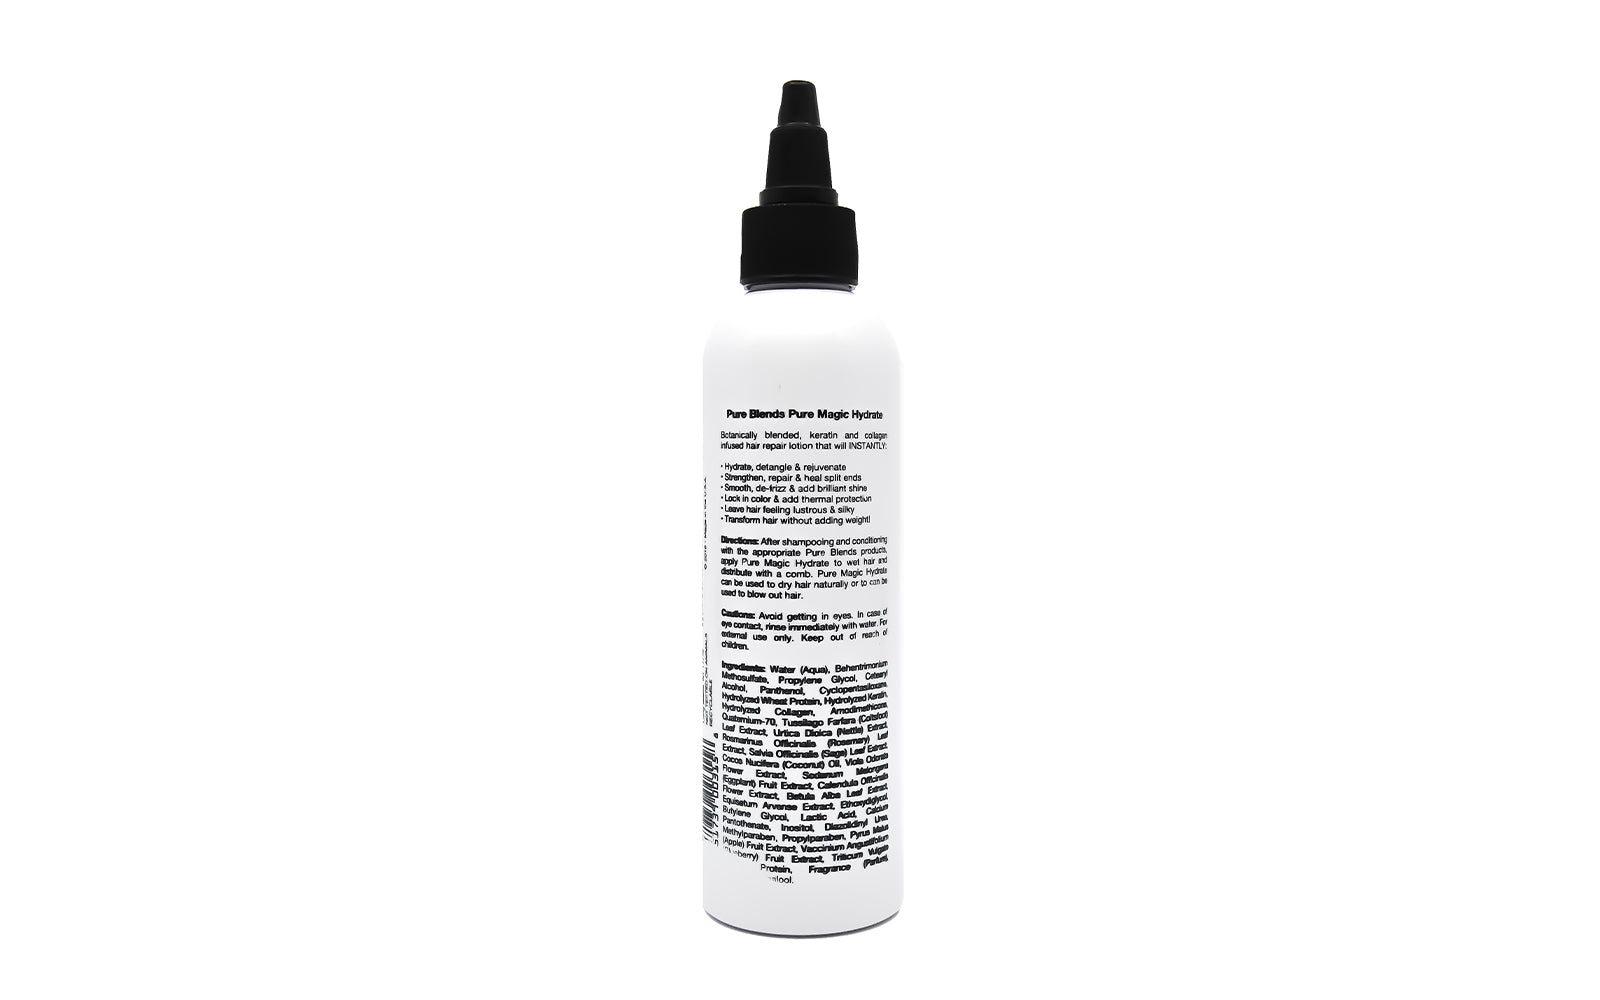 Pure Magic Hydrate Repair Potion and Leave–In Conditioner